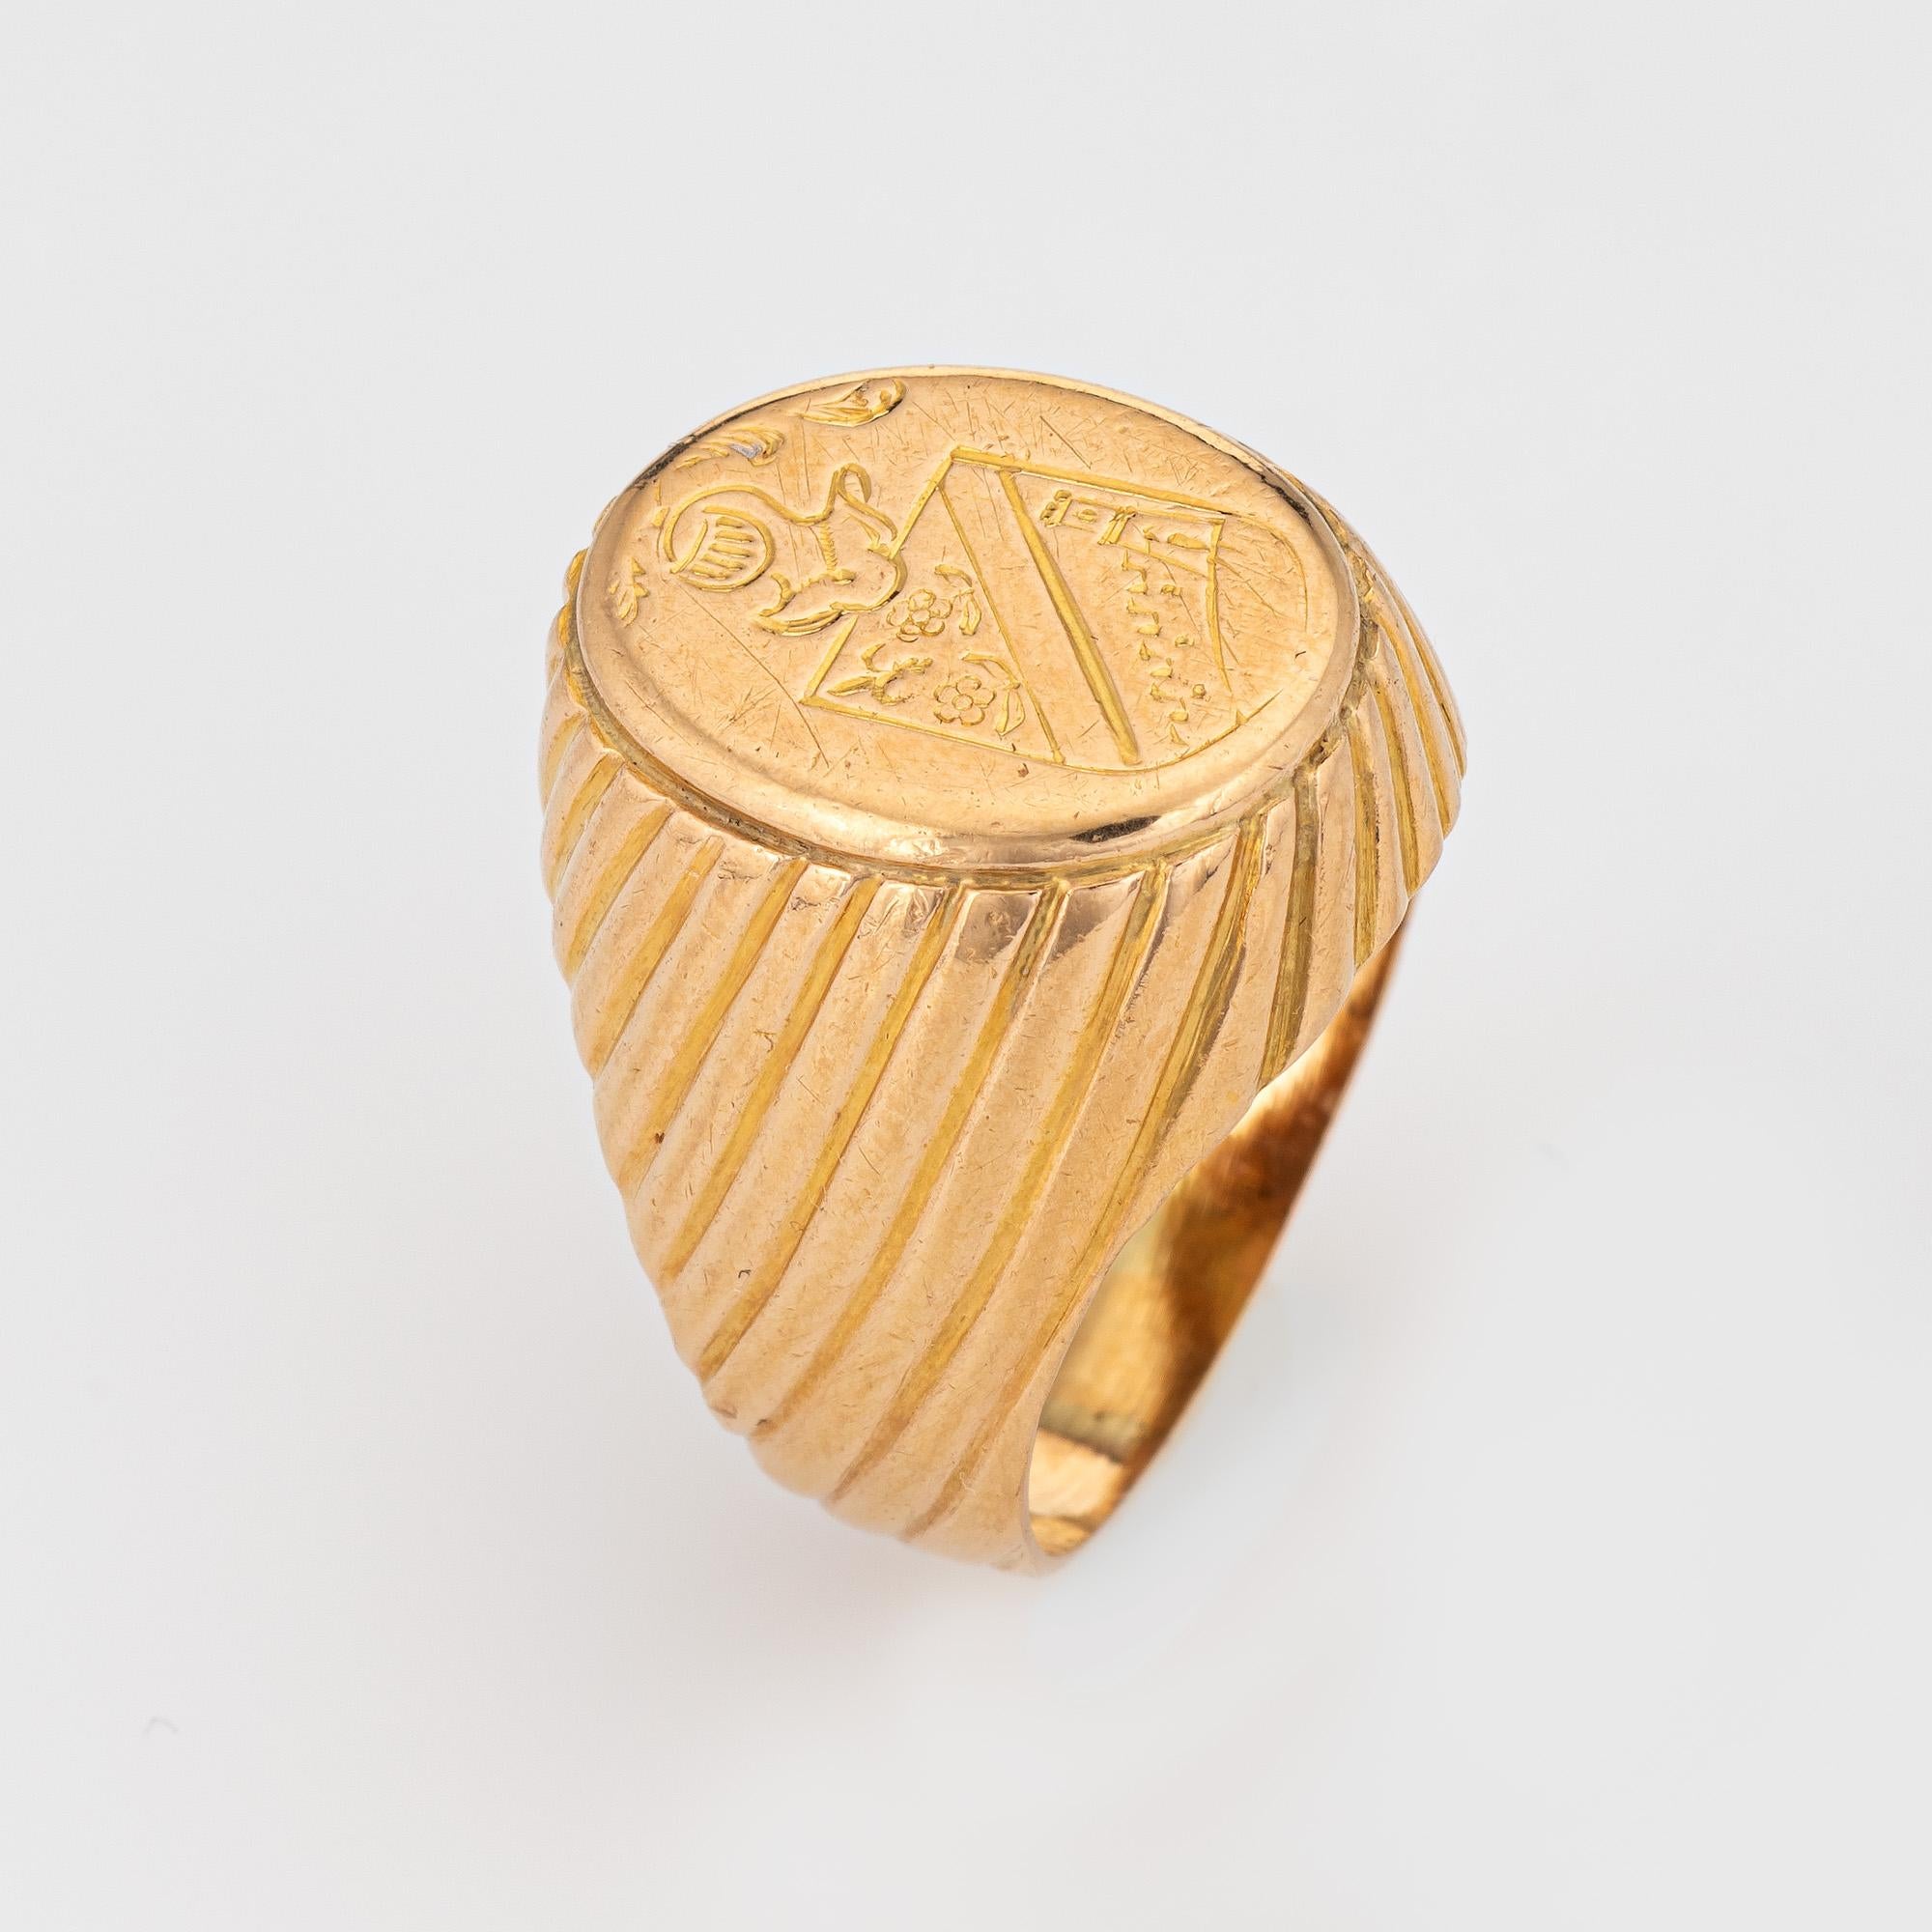 Finely detailed vintage family crest signet ring (circa 1950s to 1960s) crafted in 18 karat yellow gold. 

The signet mount features a castle with floral detail and a figure dressed in a Suit of Armor to the top. Perched on a ridged band the ring